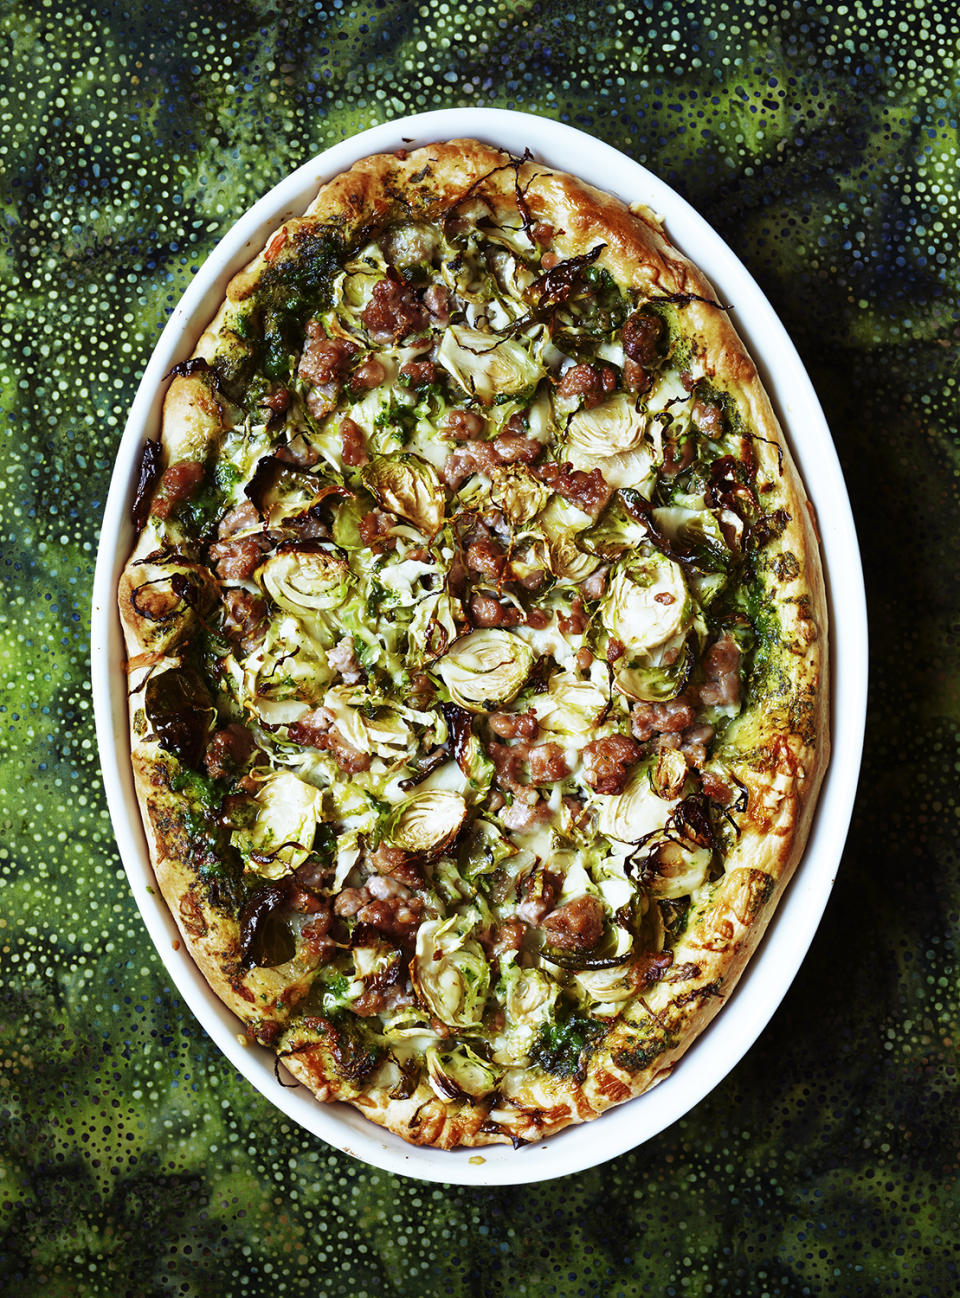 Deep-Dish Pizza With Turkey Sausage and Brussels Sprouts